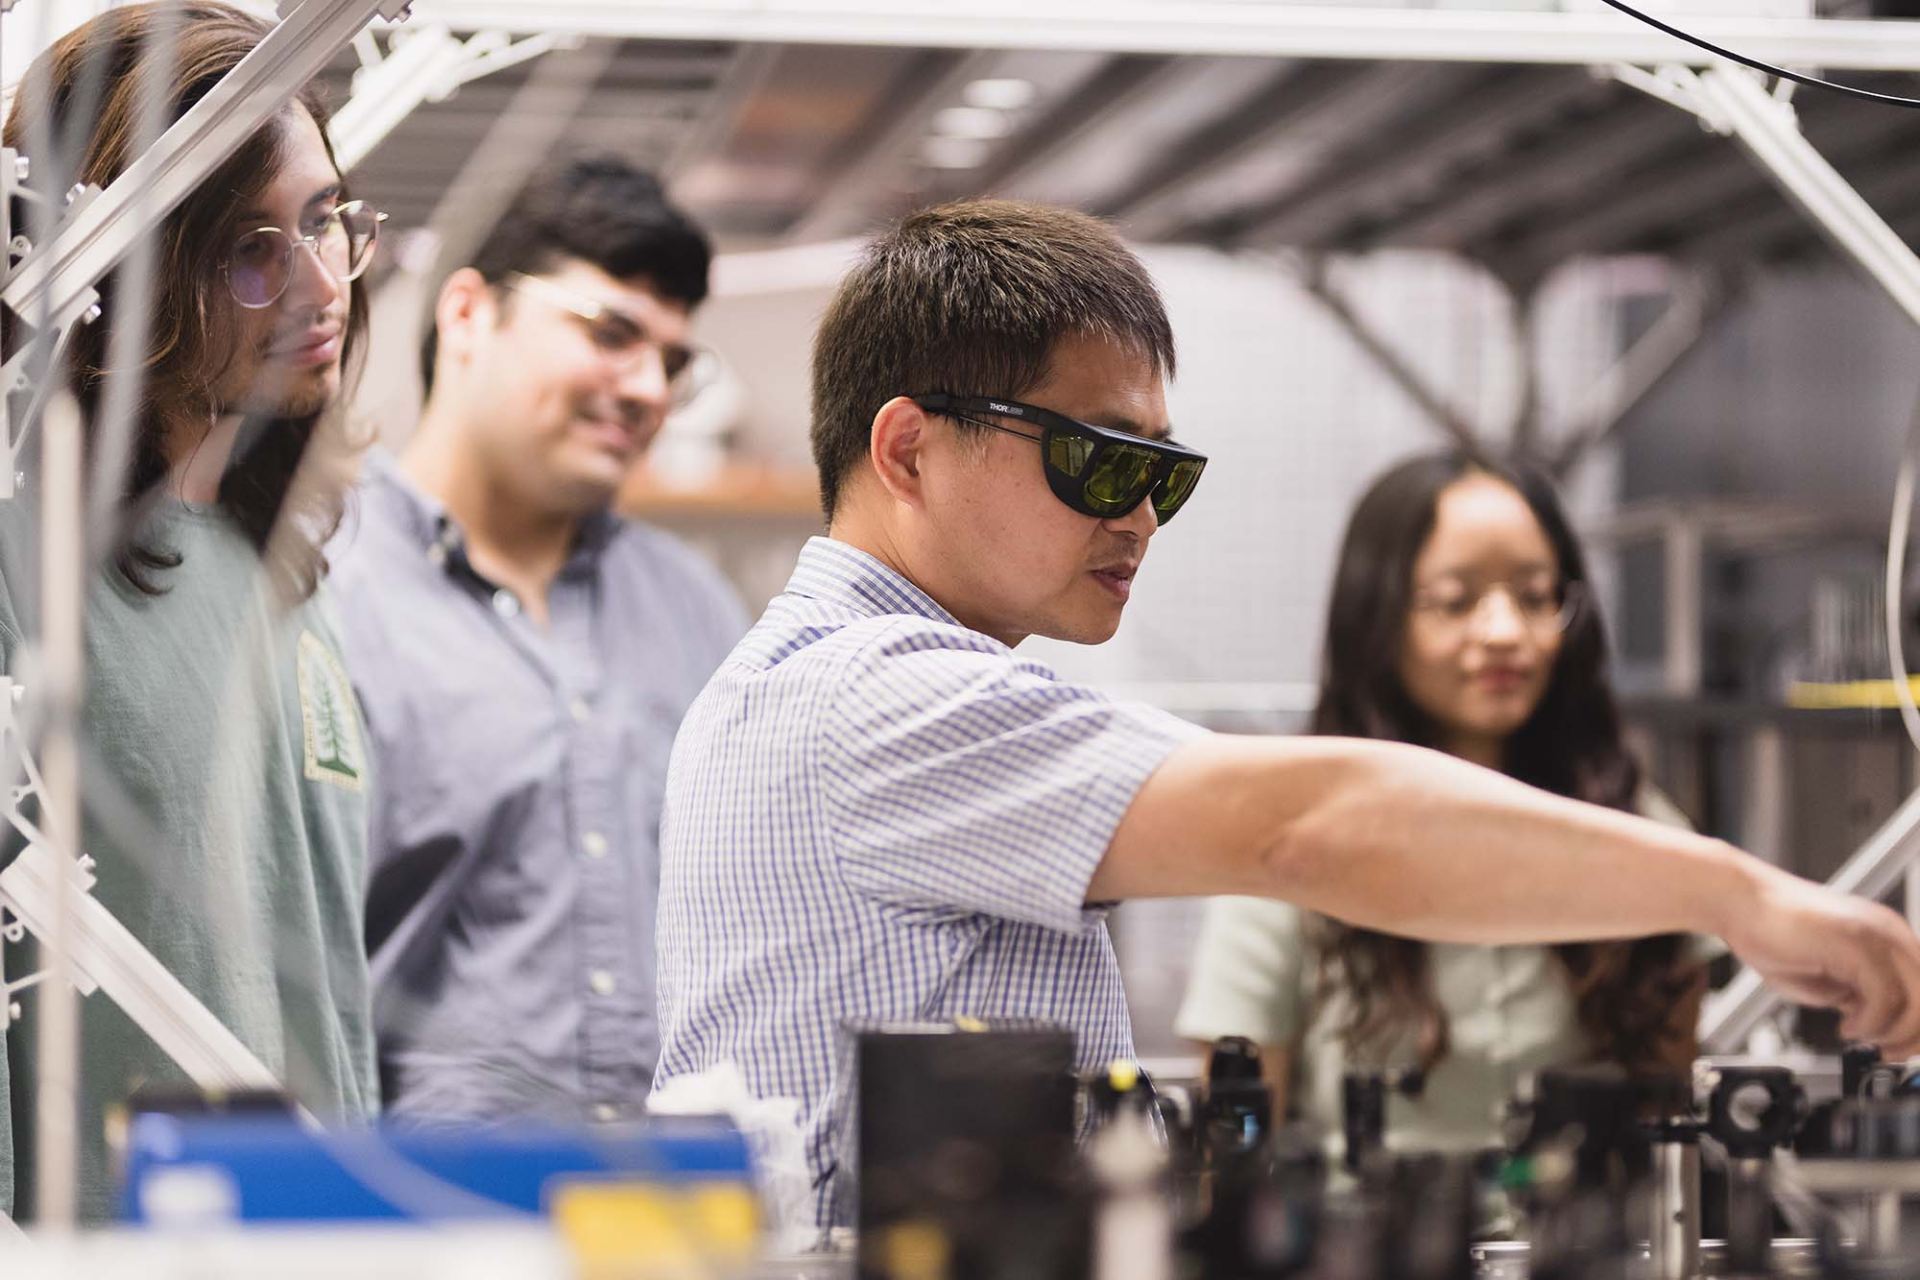 Dr. Shengwang Du (center) aligns laser beams used to trap and cool rubidium atoms to ultra-cold temperatures. Members of Du’s research group include, from left, undergraduate physics students Lennon Kirby and Sean Smith, and doctoral student Manshuo Lin. Other members of Du’s lab (not pictured) include doctoral students Christopher Li, Alan Zanders BS’18, MS’20 and Xuanying Lai.